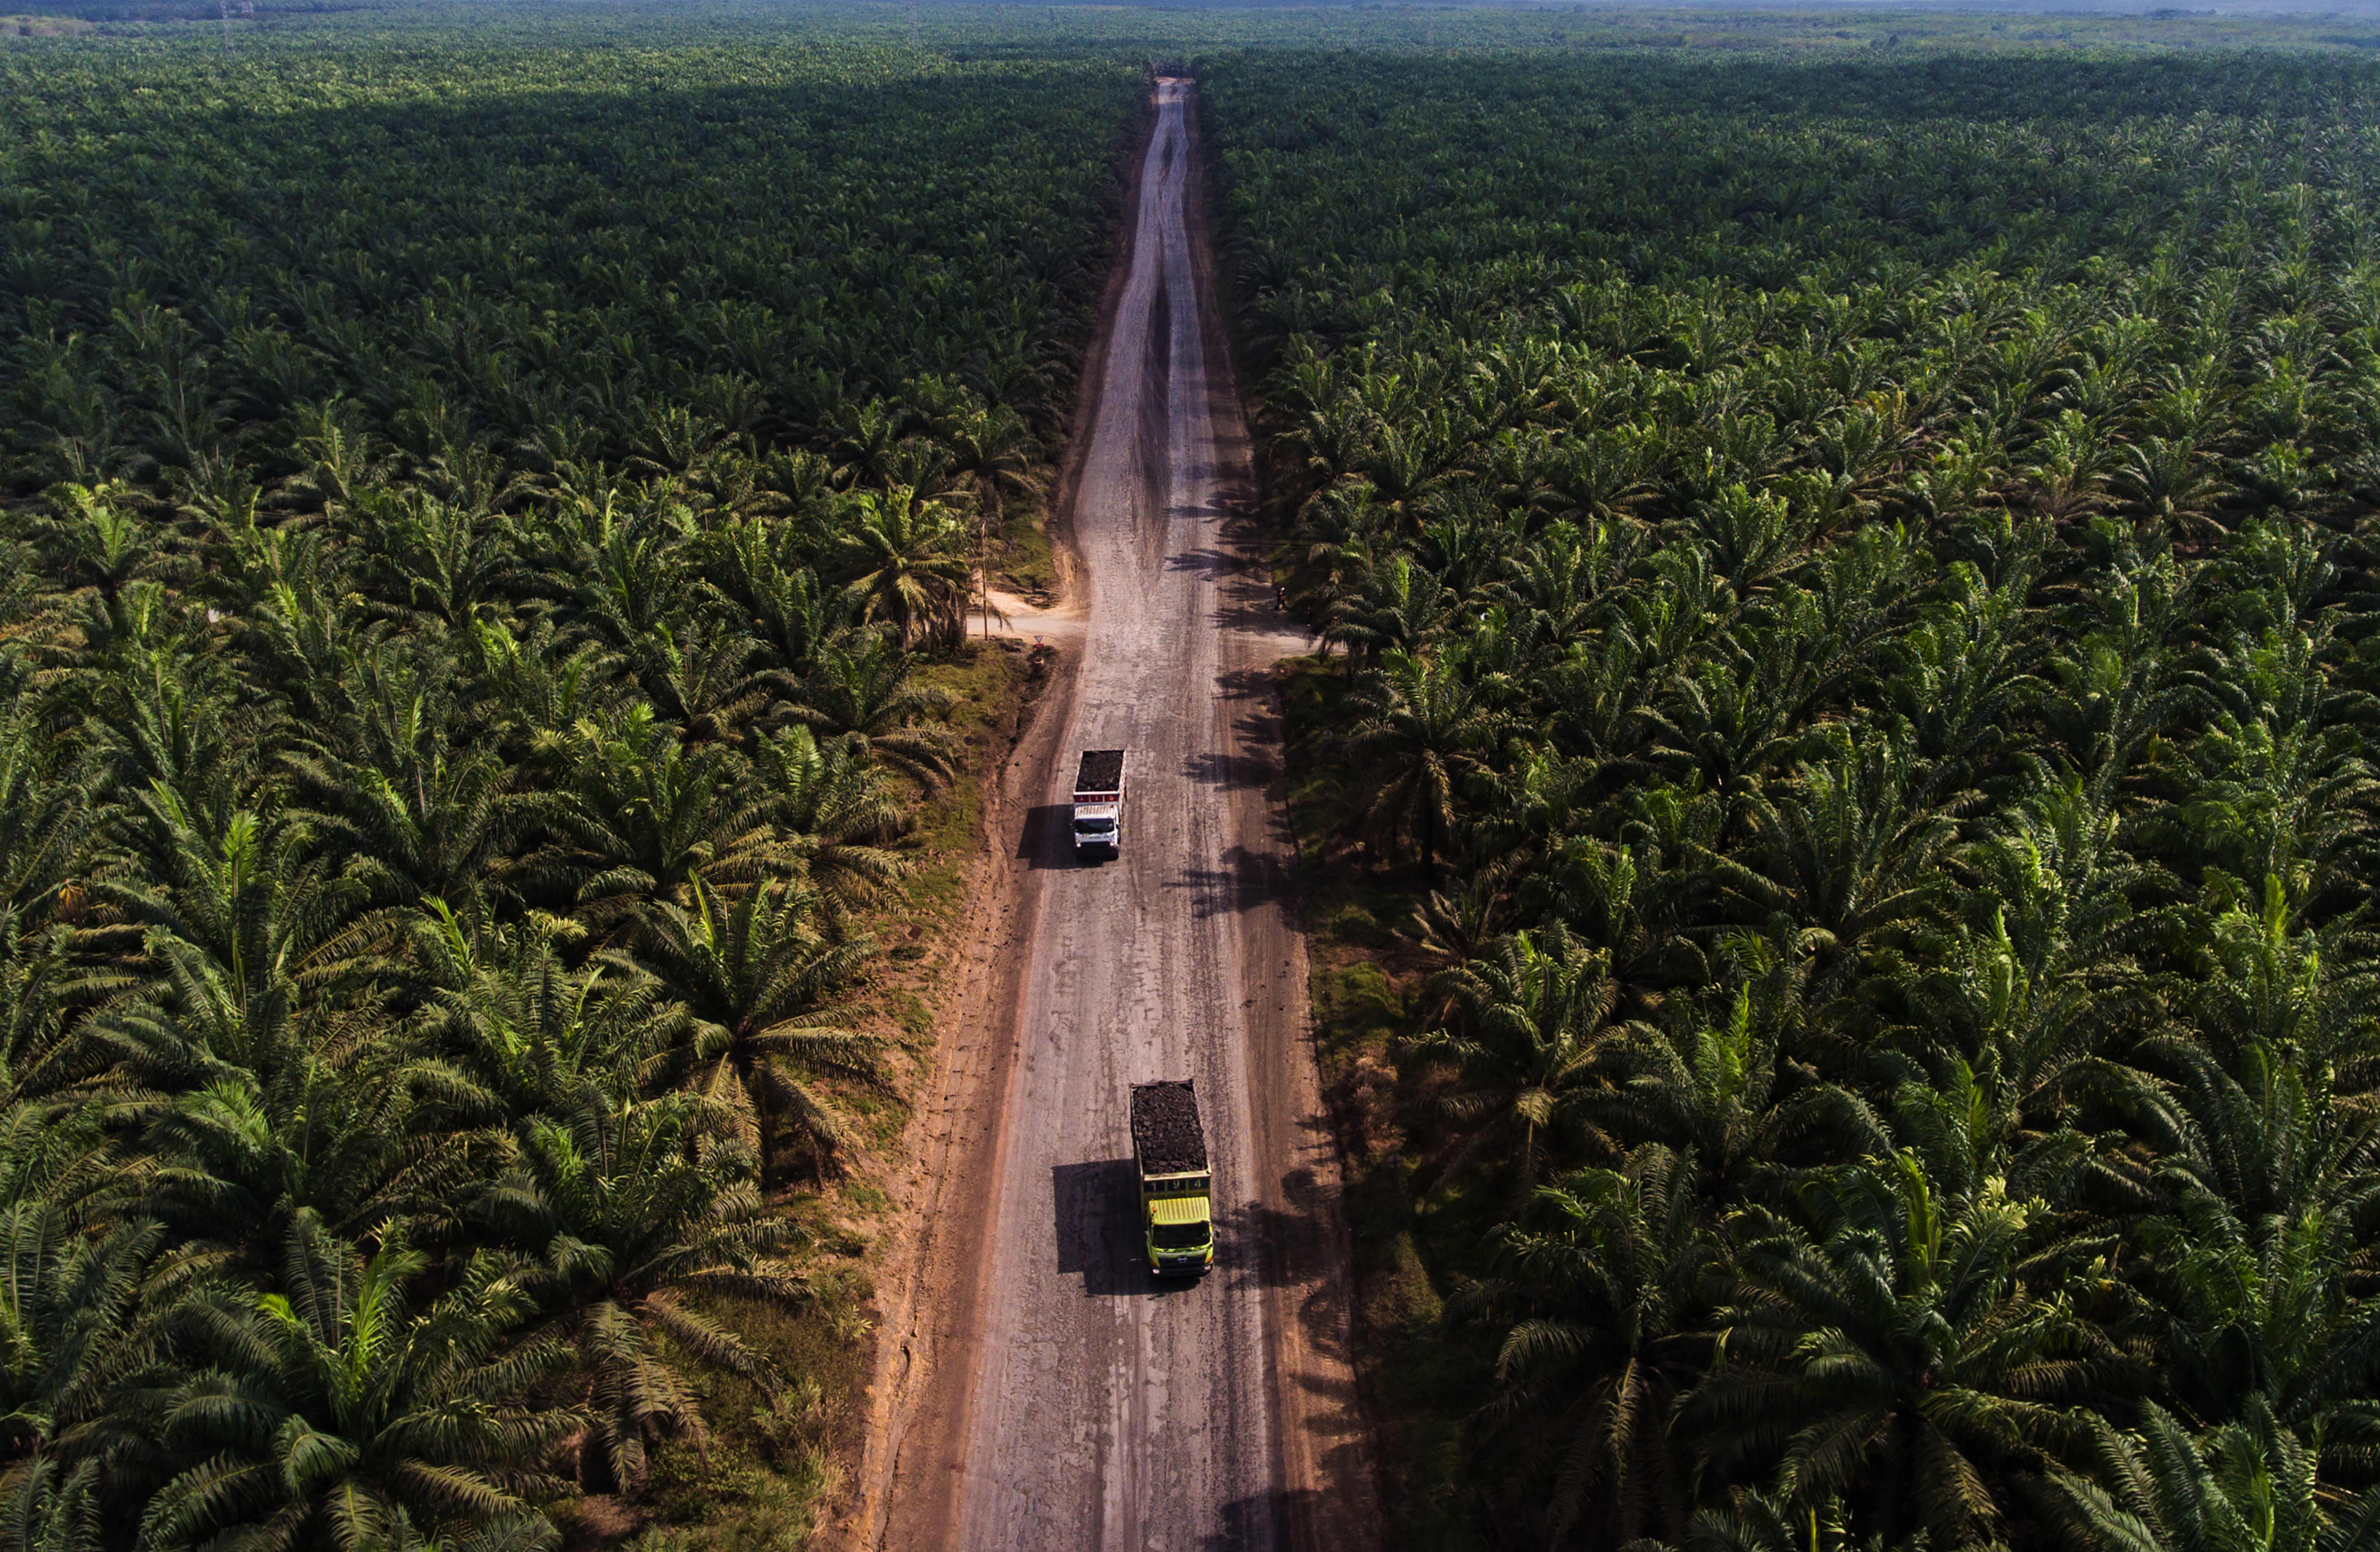 Unilever in data pilot to check for deforestation in its supply chain